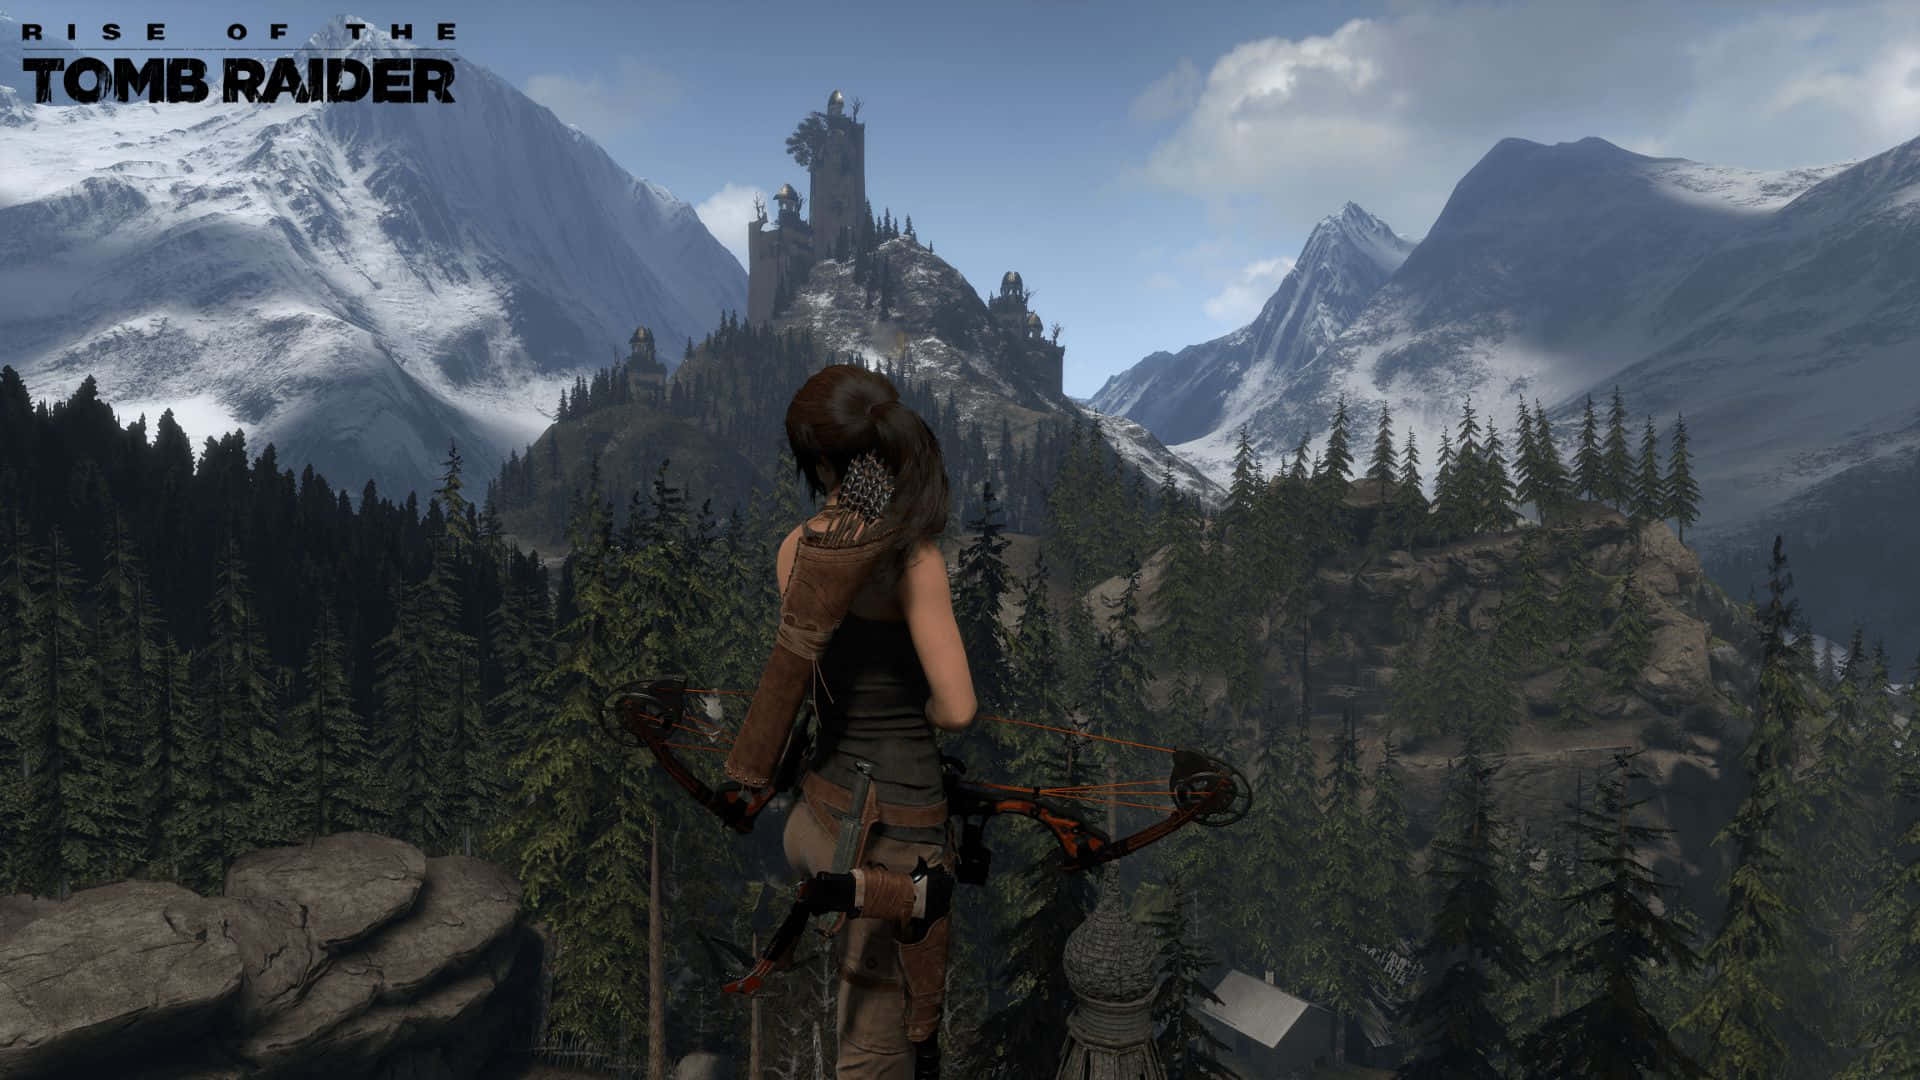 Lara Croft in Action - 1080p Rise of the Tomb Raider Background